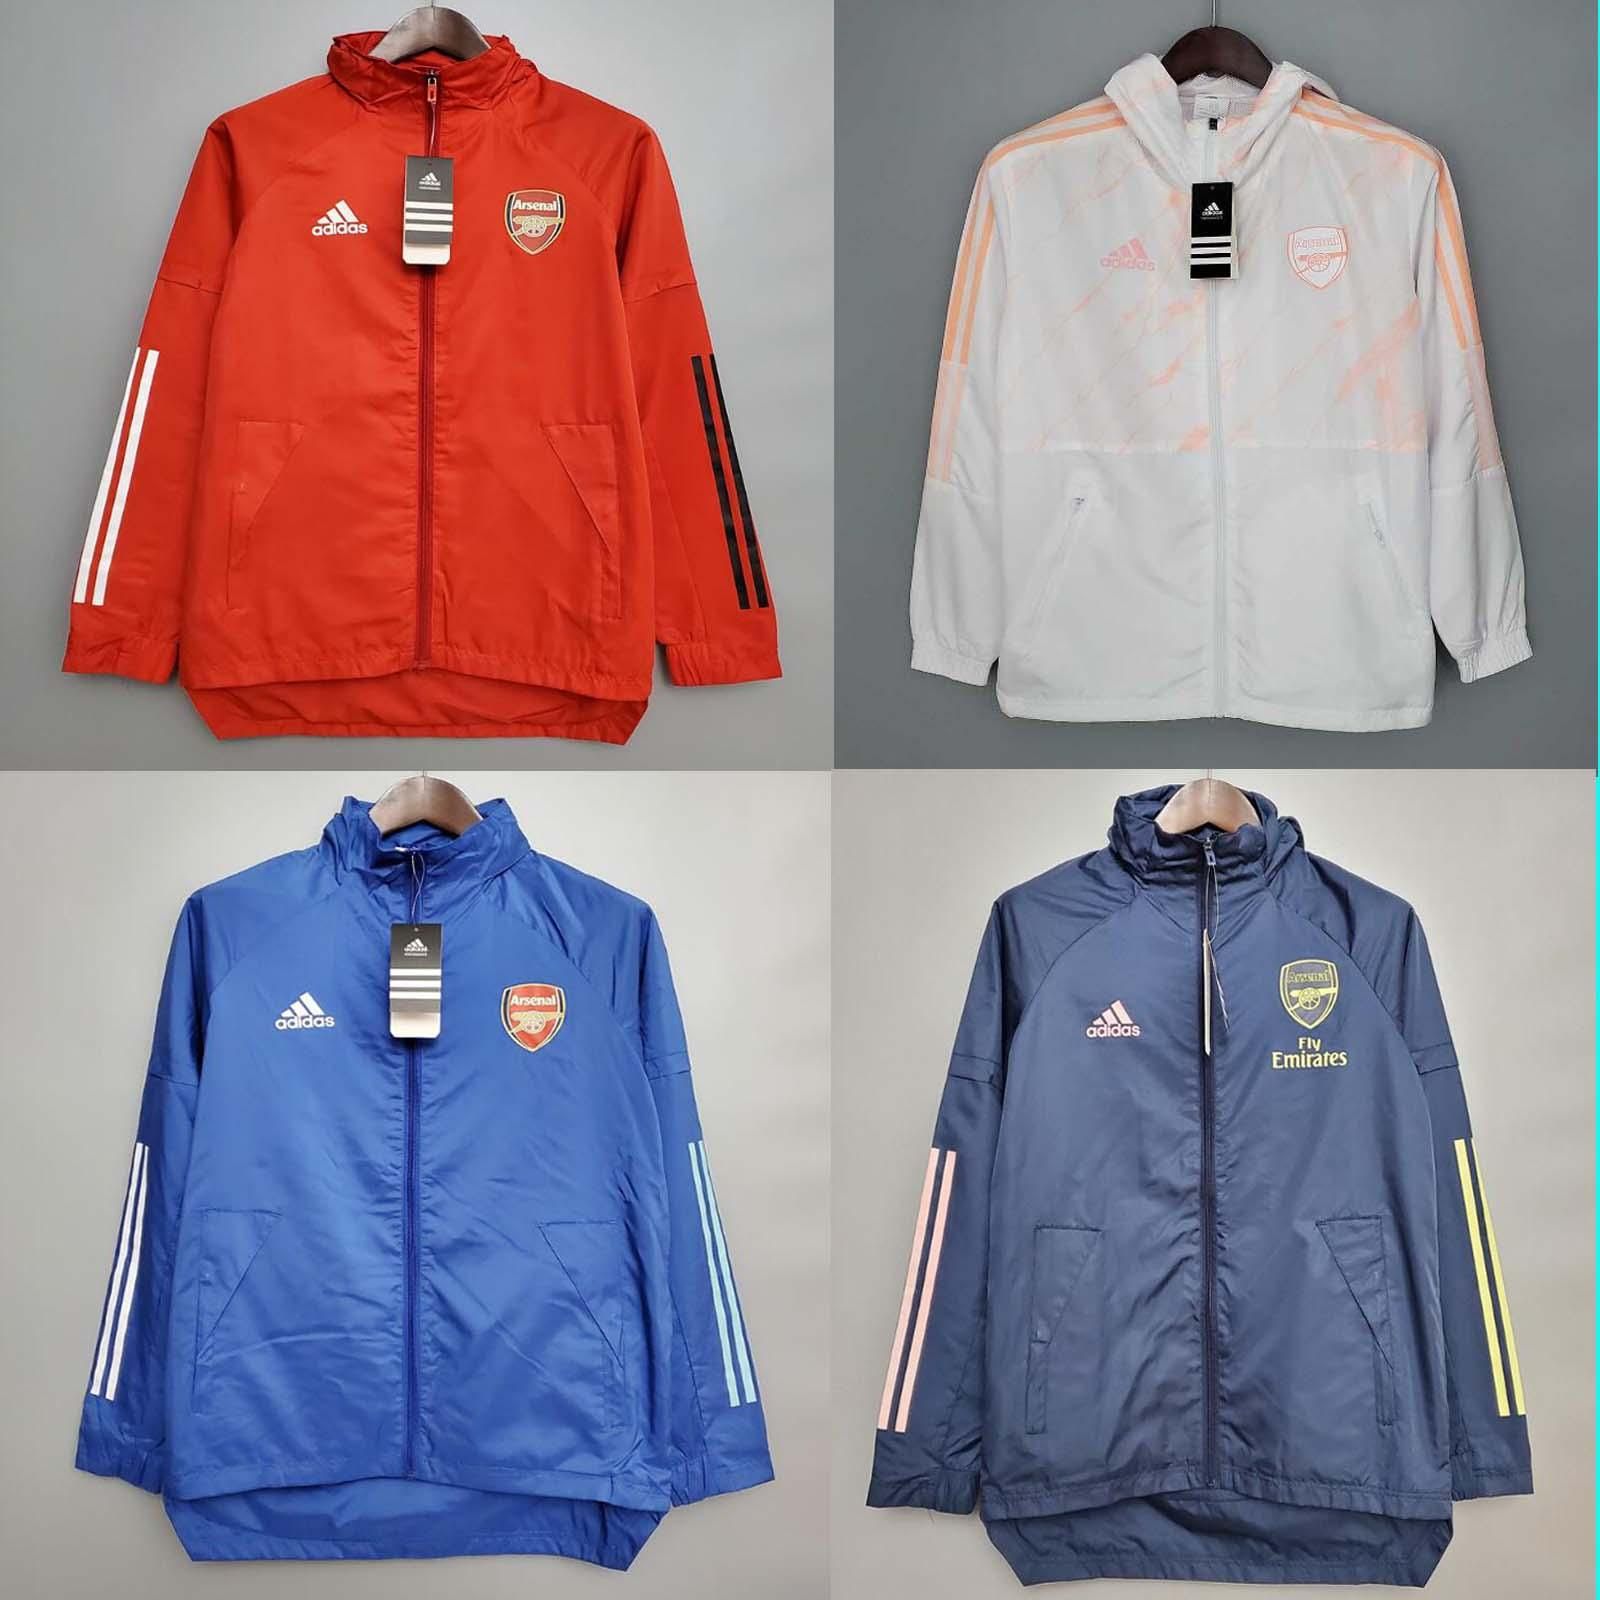 Arsenal Football Club Official Soccer Gift Mens Retro Track Top Jacket